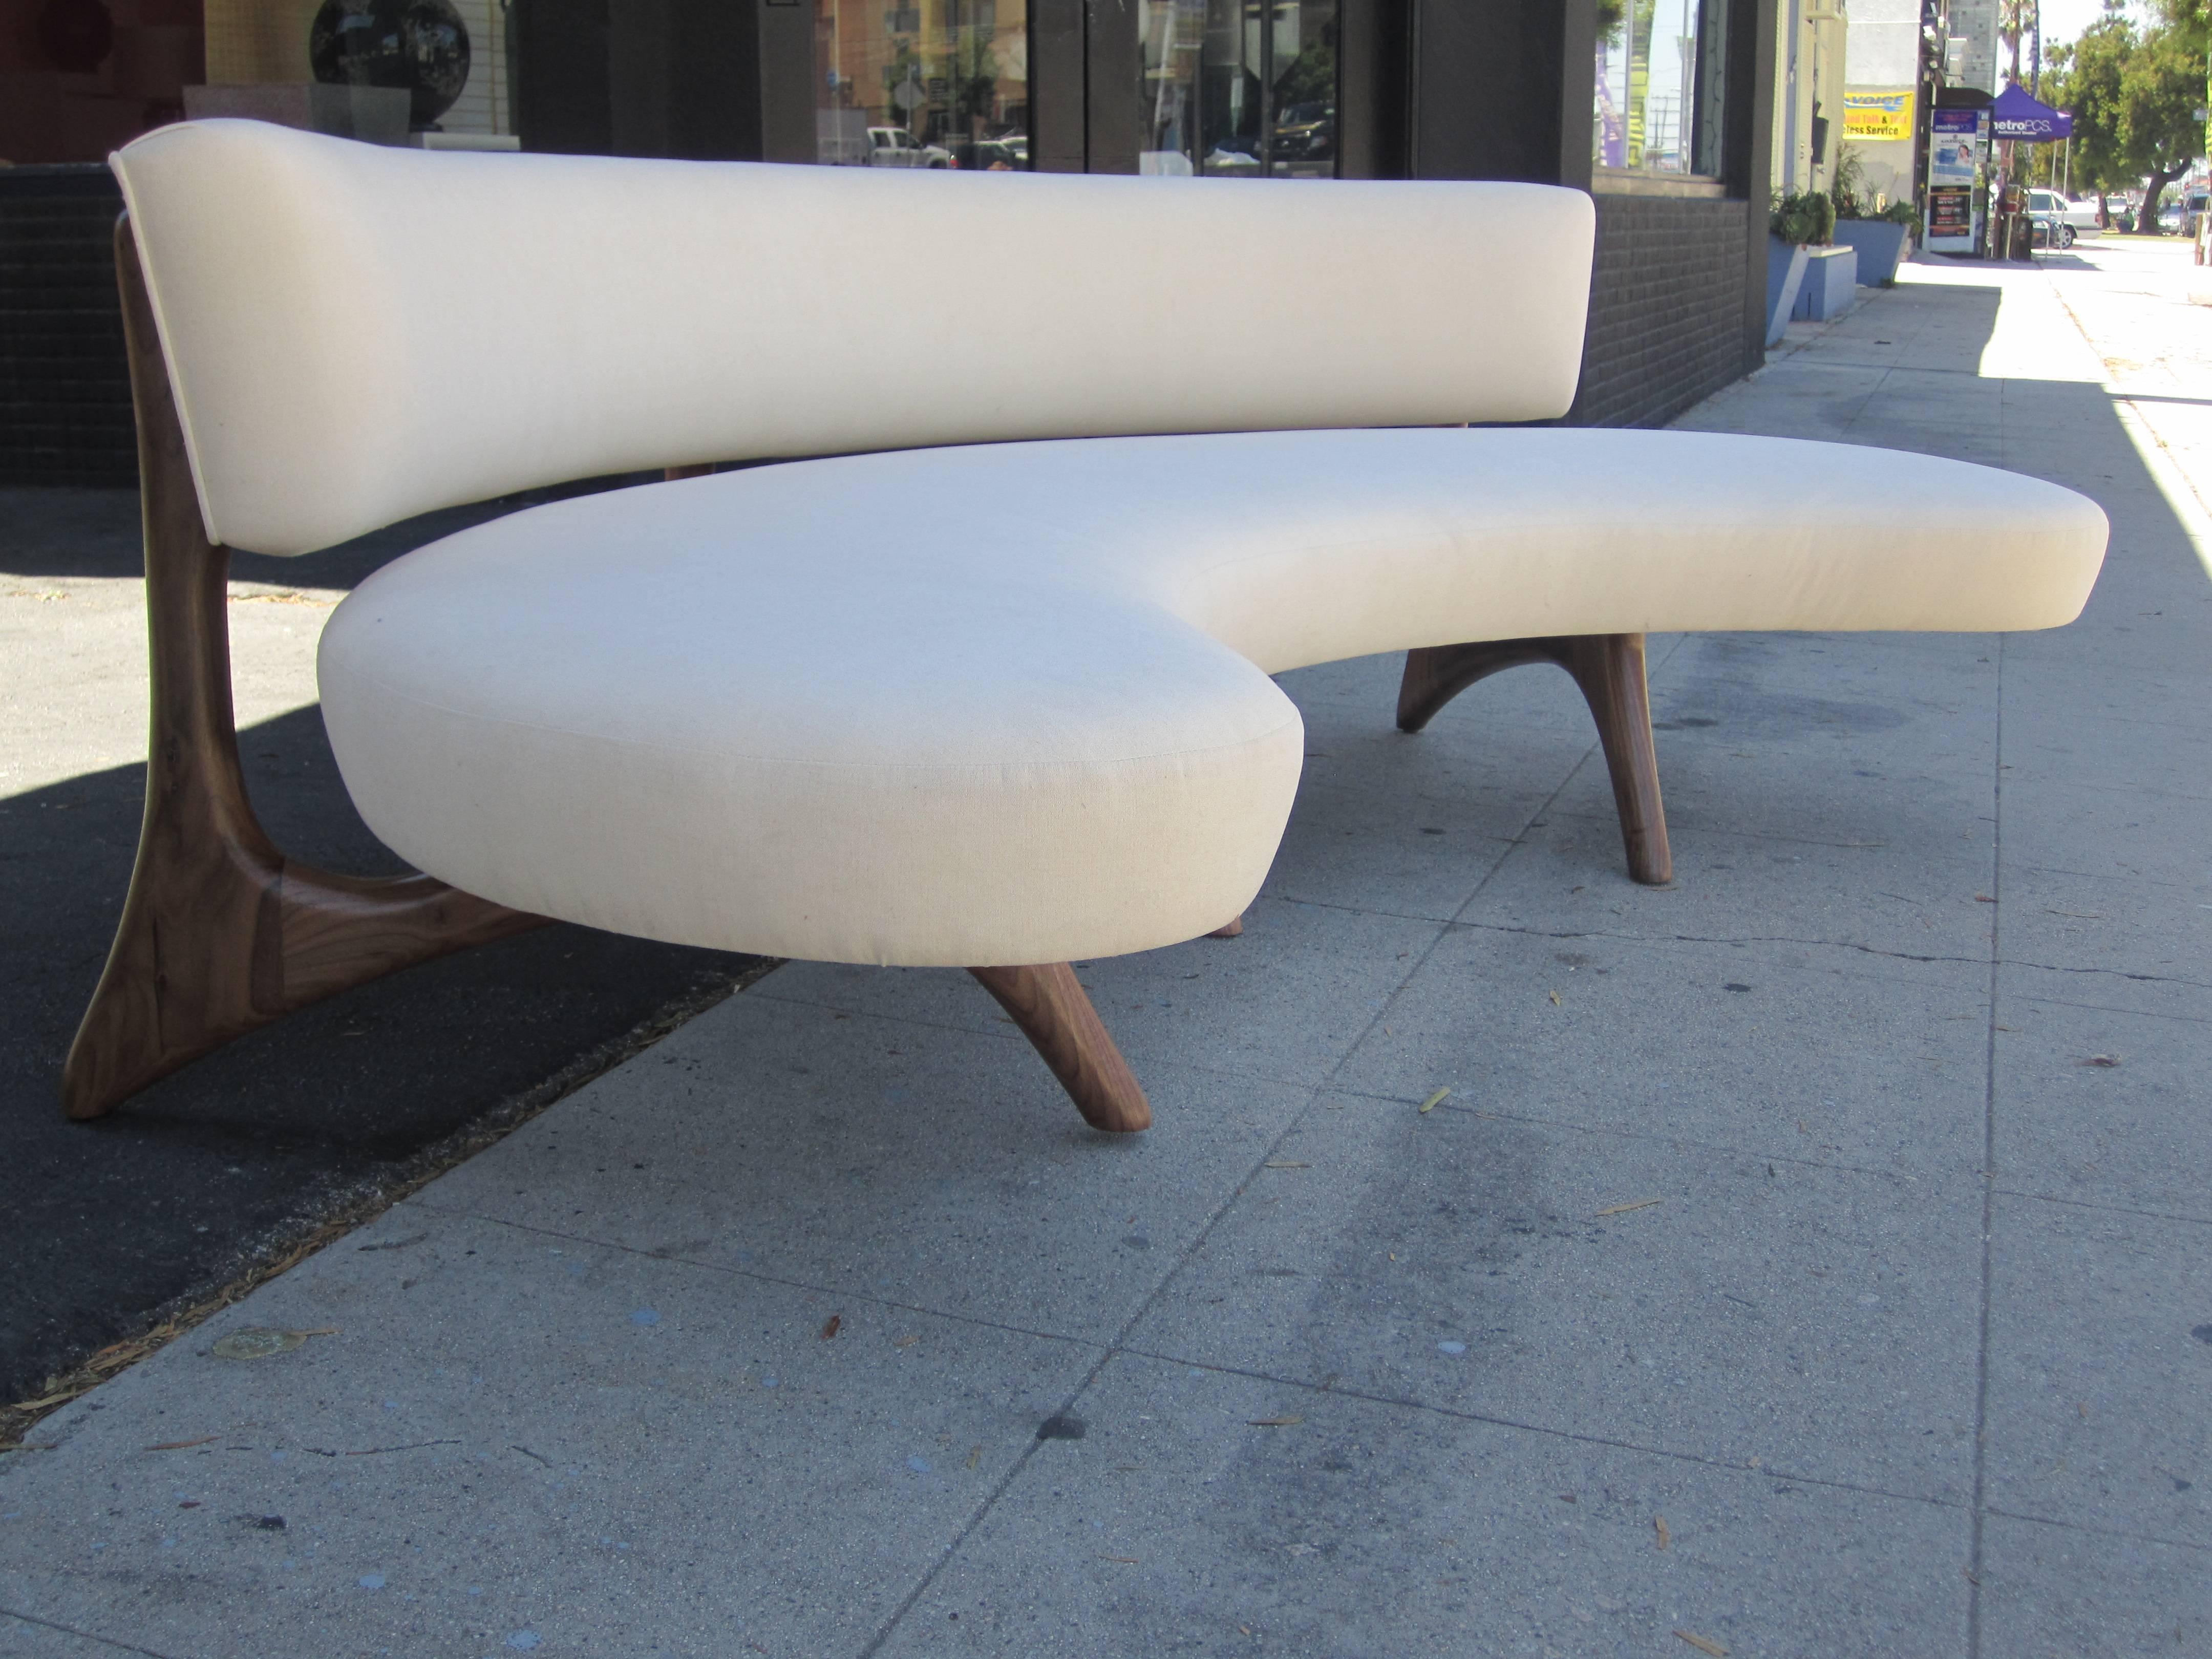 A biomorphic walnut sofa with curved backrest and a floating platform seat set on sculptural carved legs which blend seamlessly into the support for the back. Please contact us about the fabric options available.